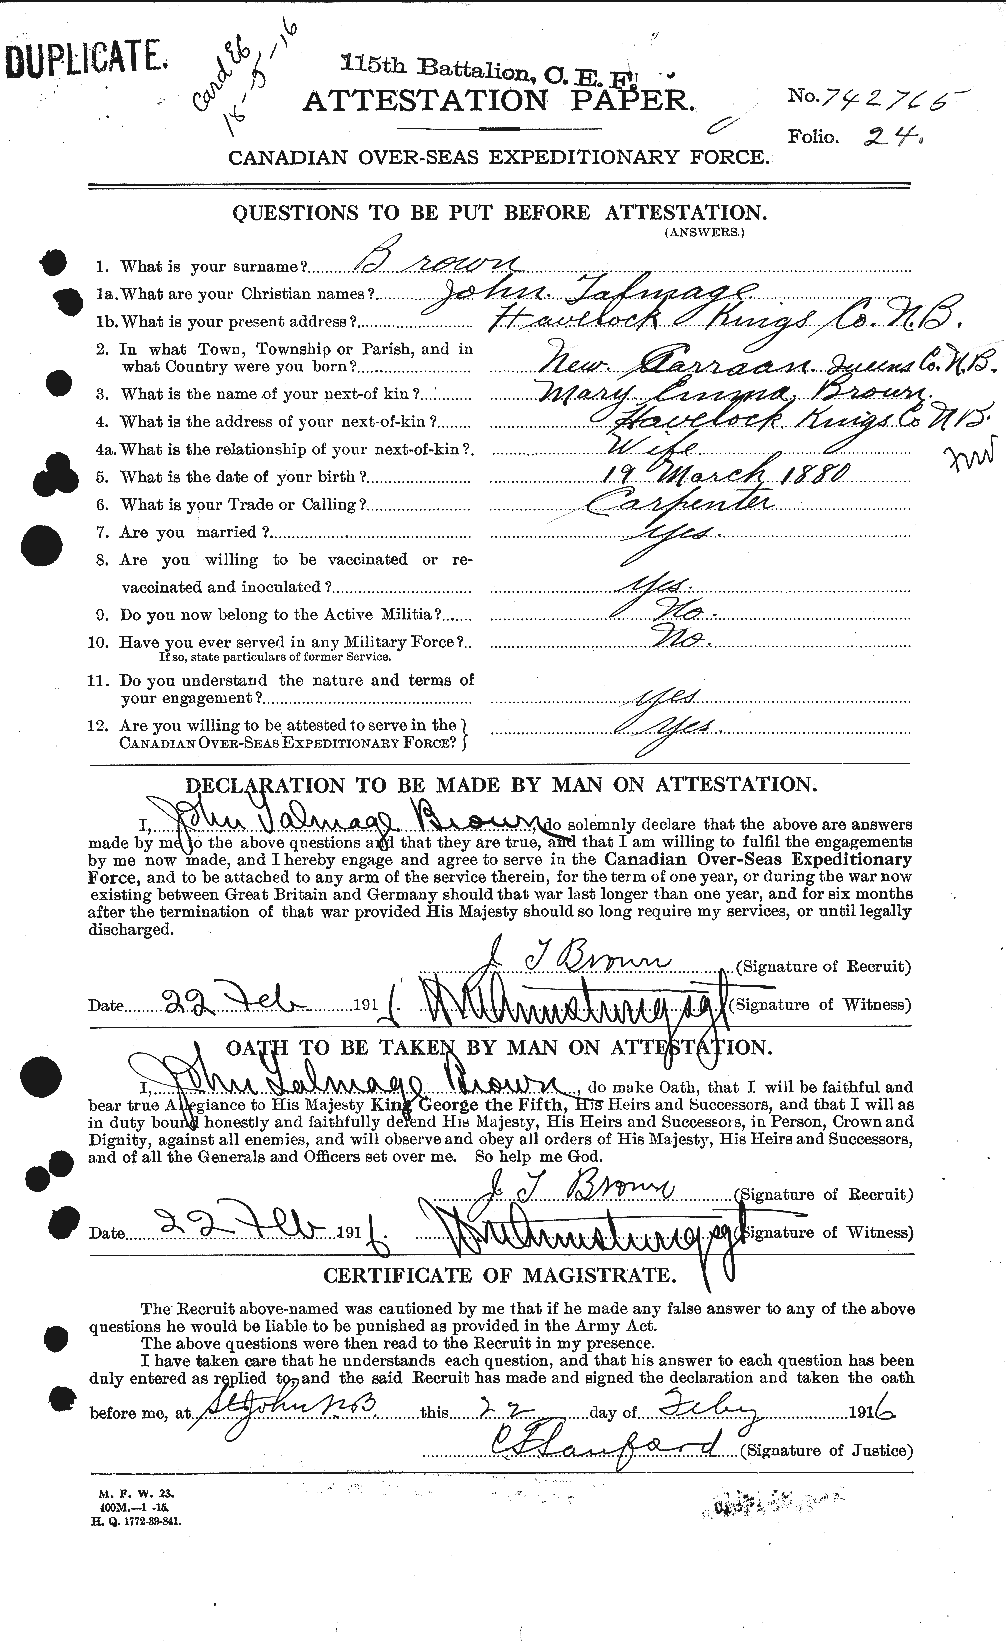 Personnel Records of the First World War - CEF 265881a